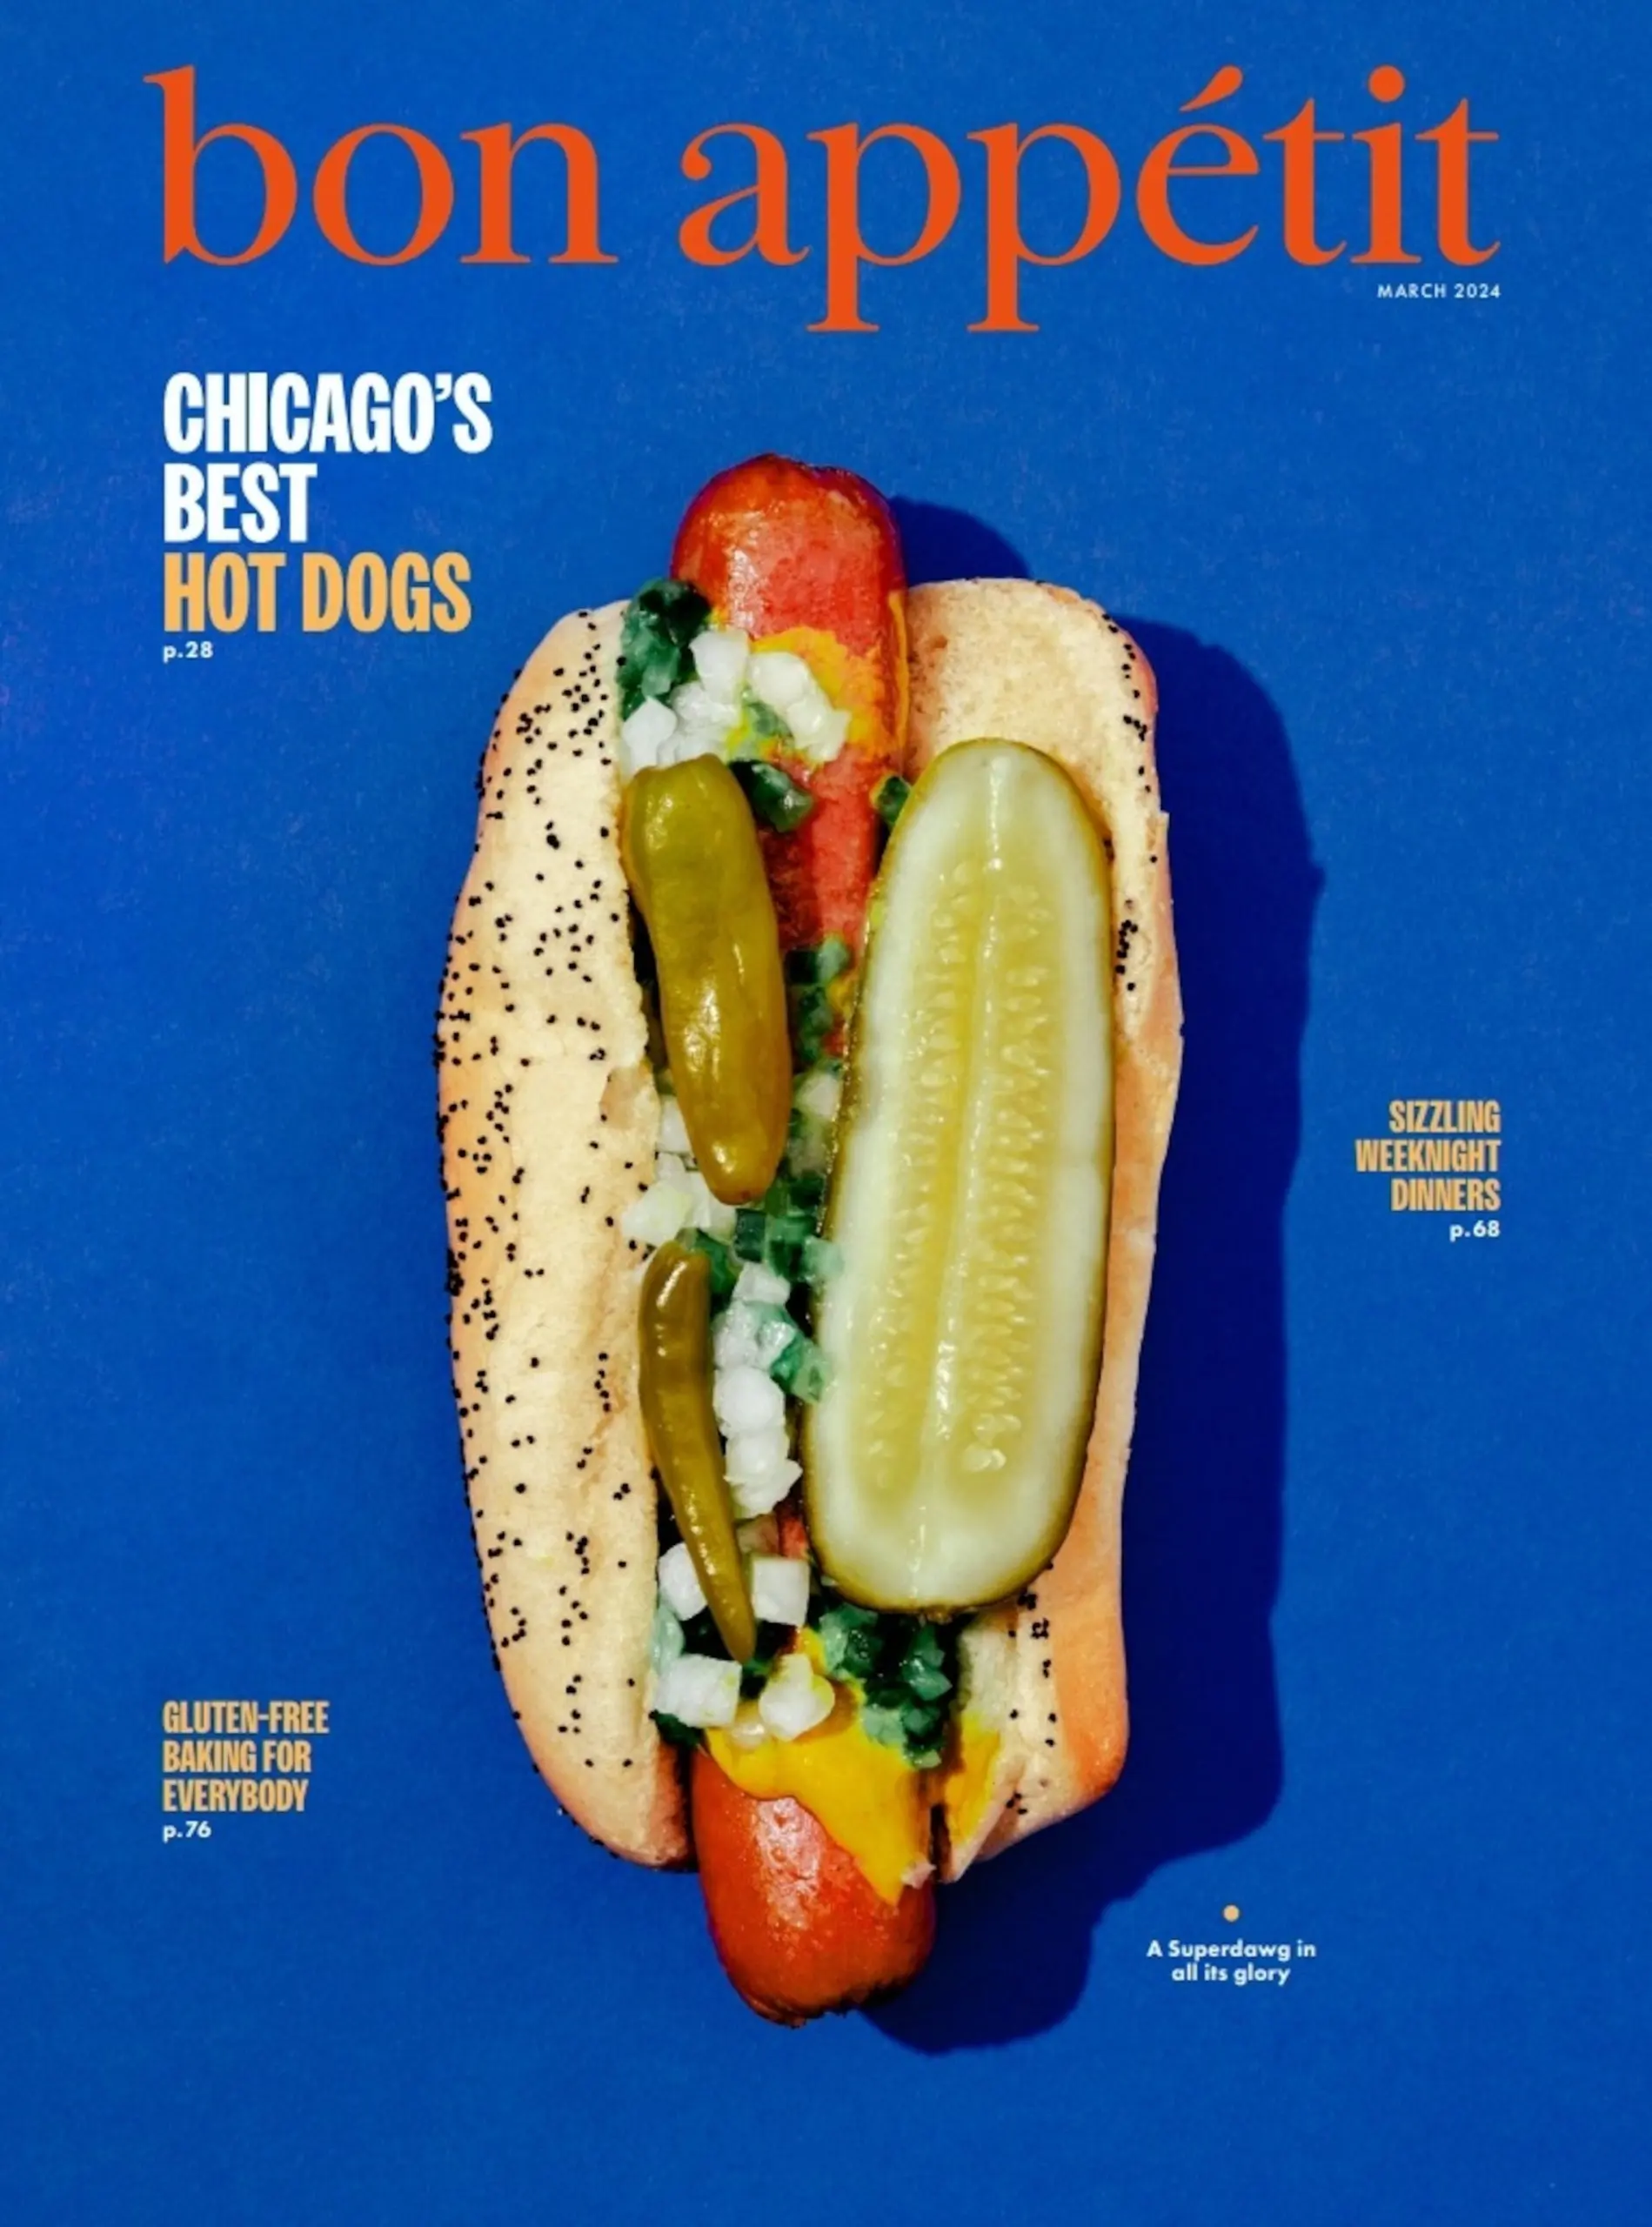 PHOTO: The cover of Bon Appetit's March issue.